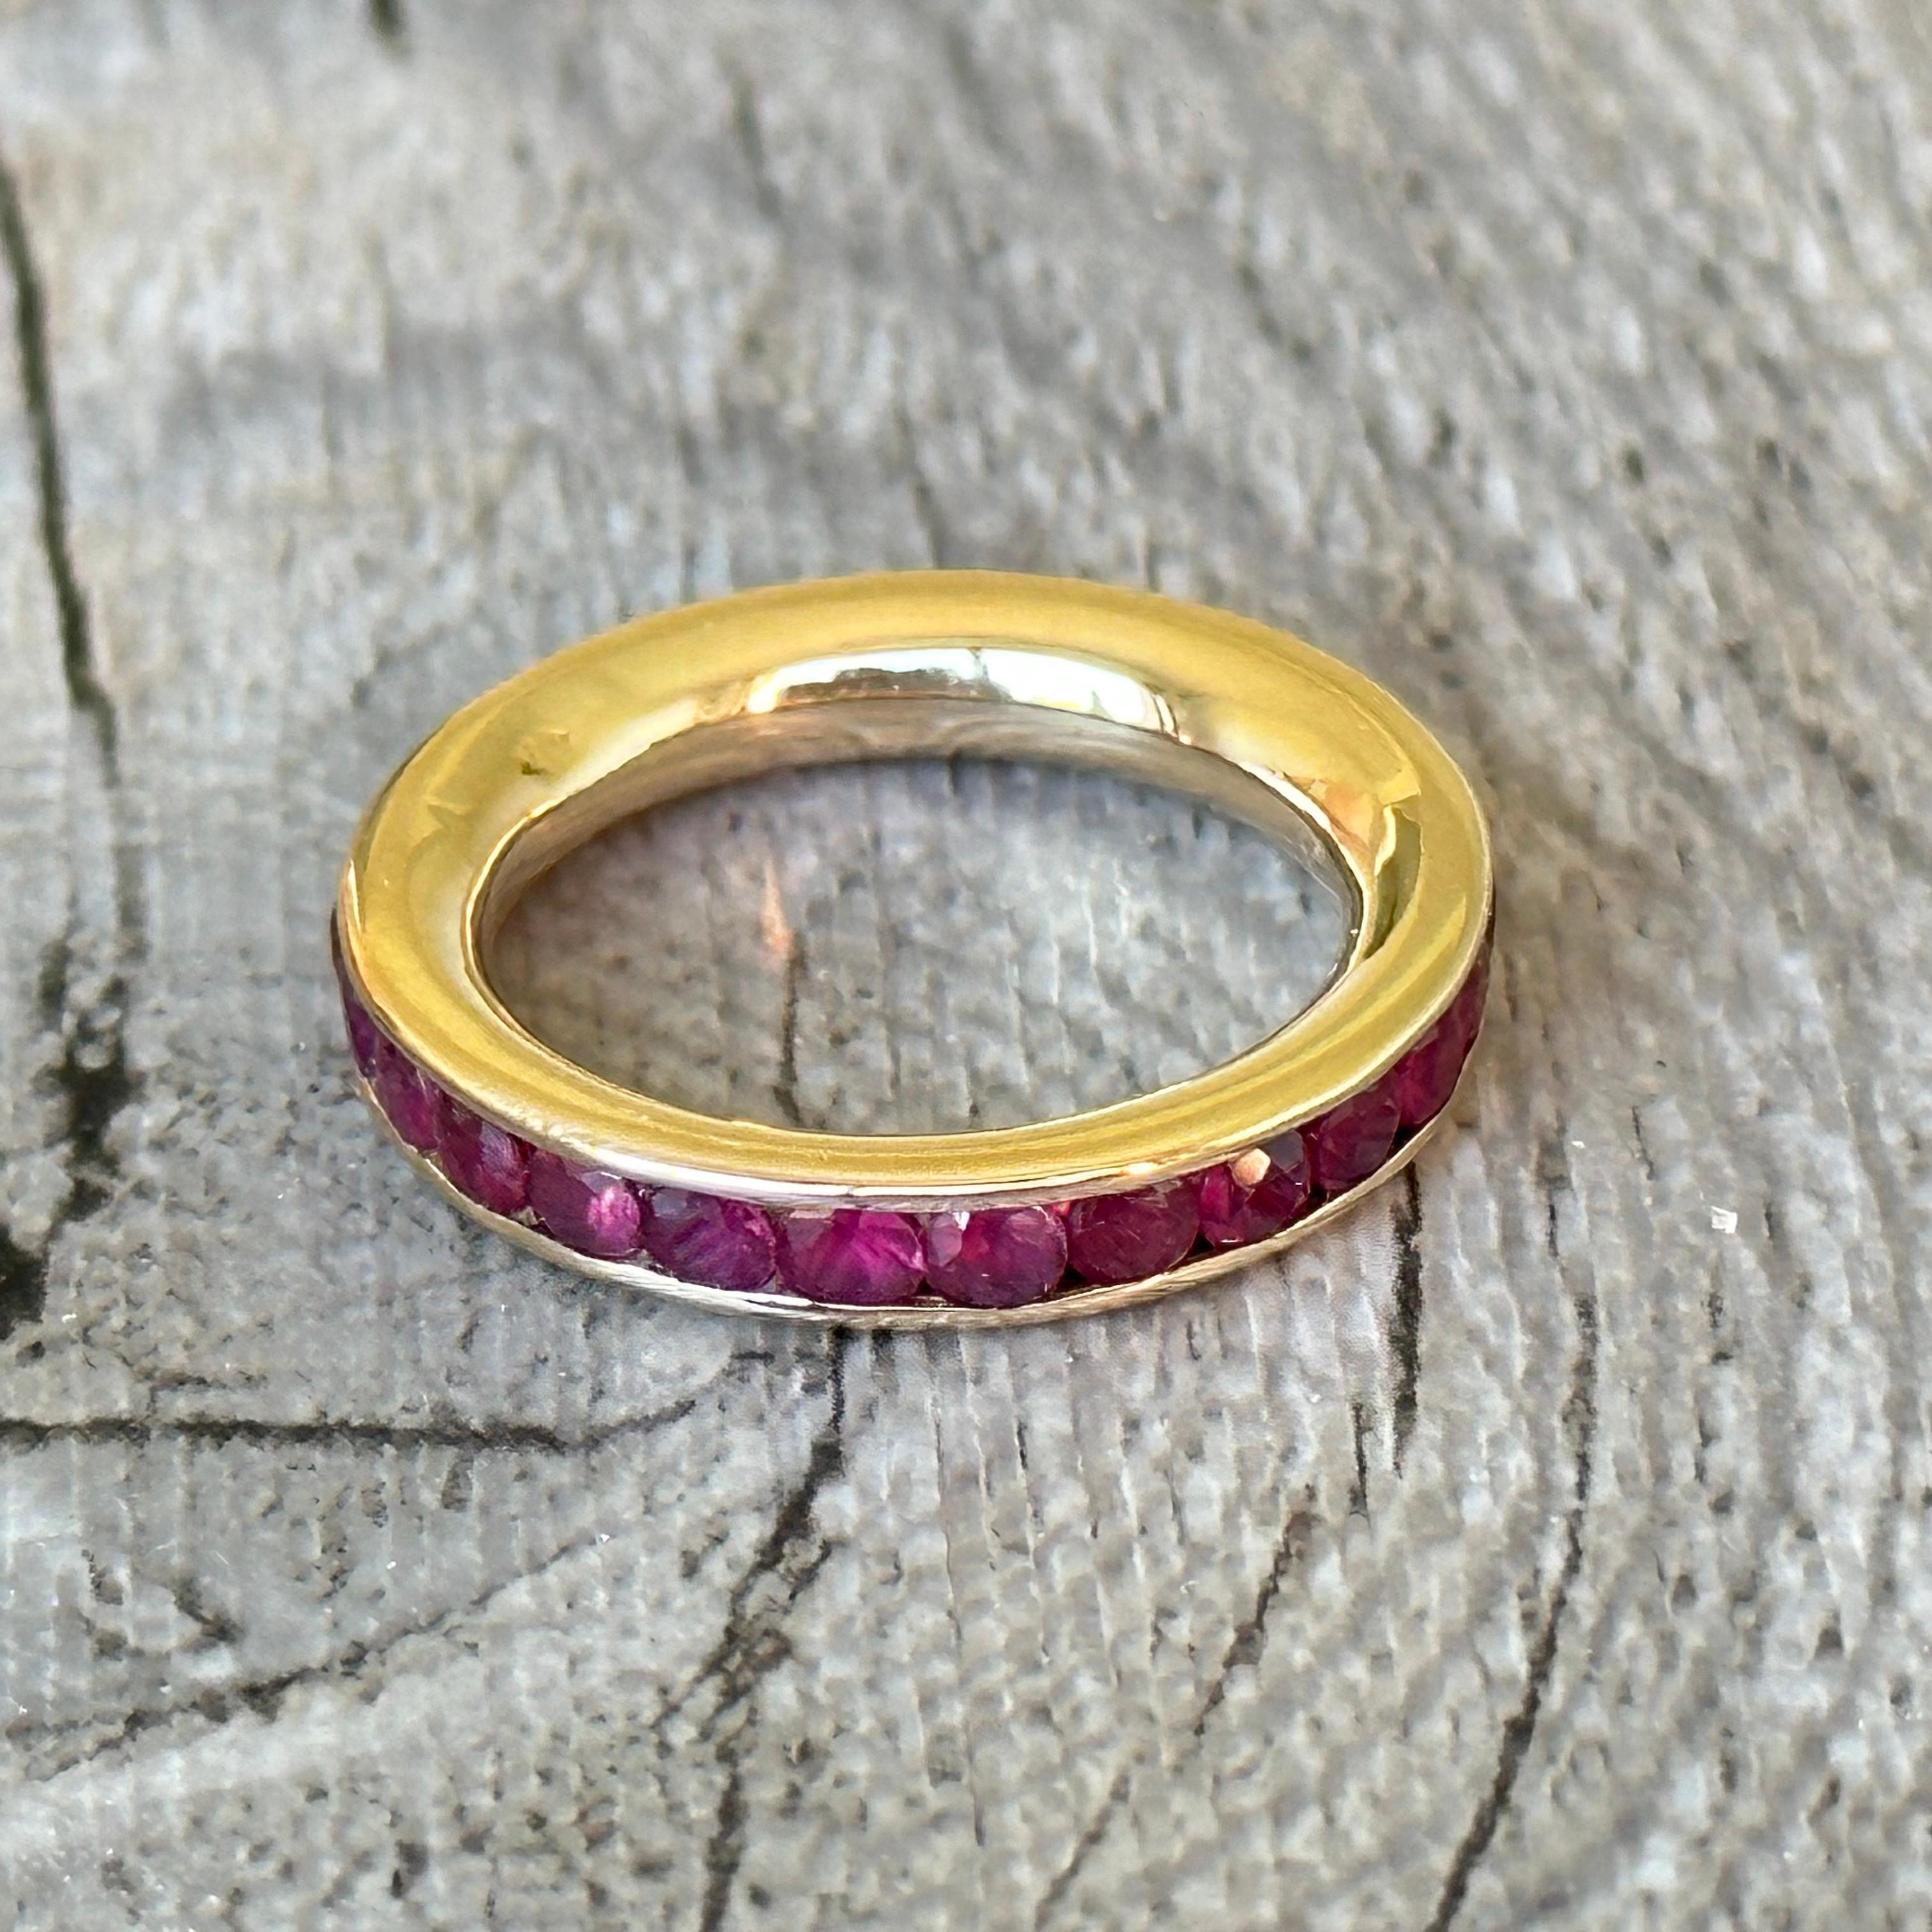 American wedding ring or full set in 18 carat gold or 750 thousandths with rubies for a total of approximately 1 carat.
Size 5,5.
Weight 3.90 grams.